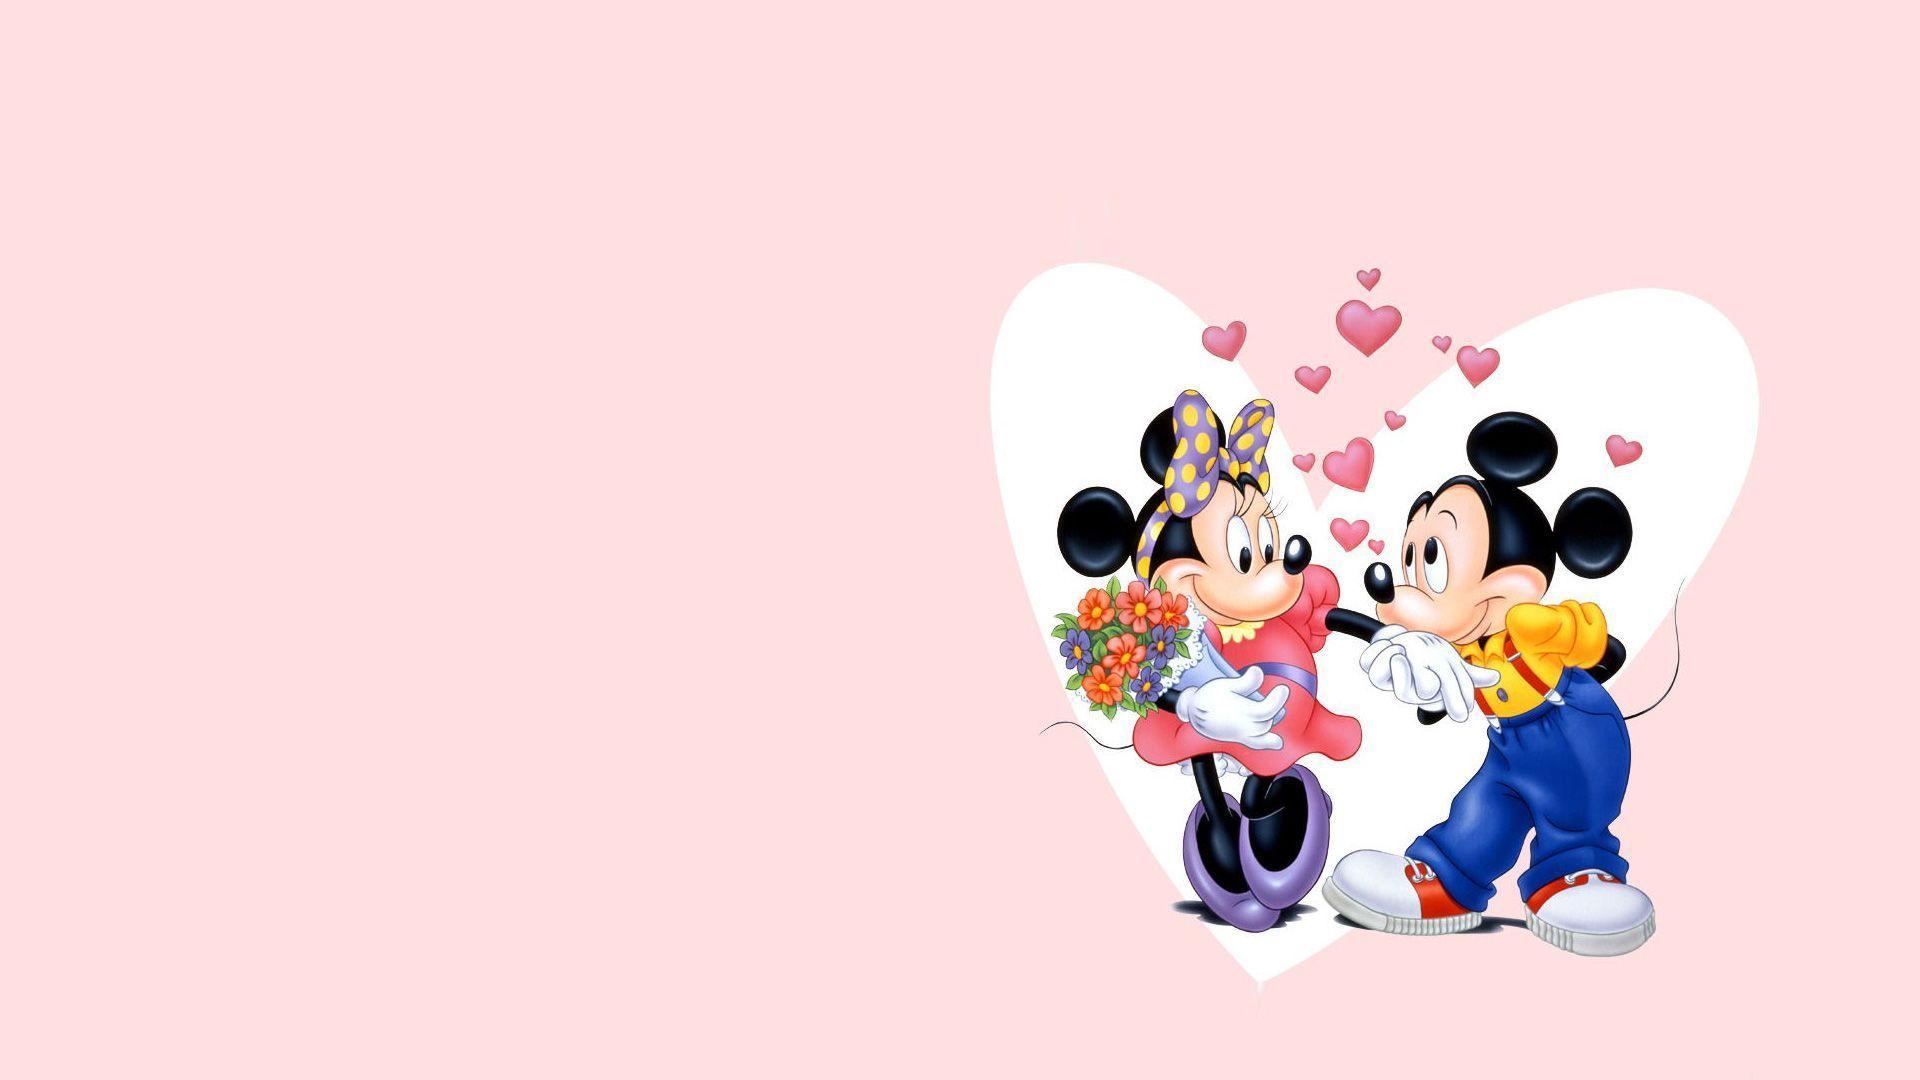 Wallpaper For > Baby Mickey And Minnie Mouse Wallpaper